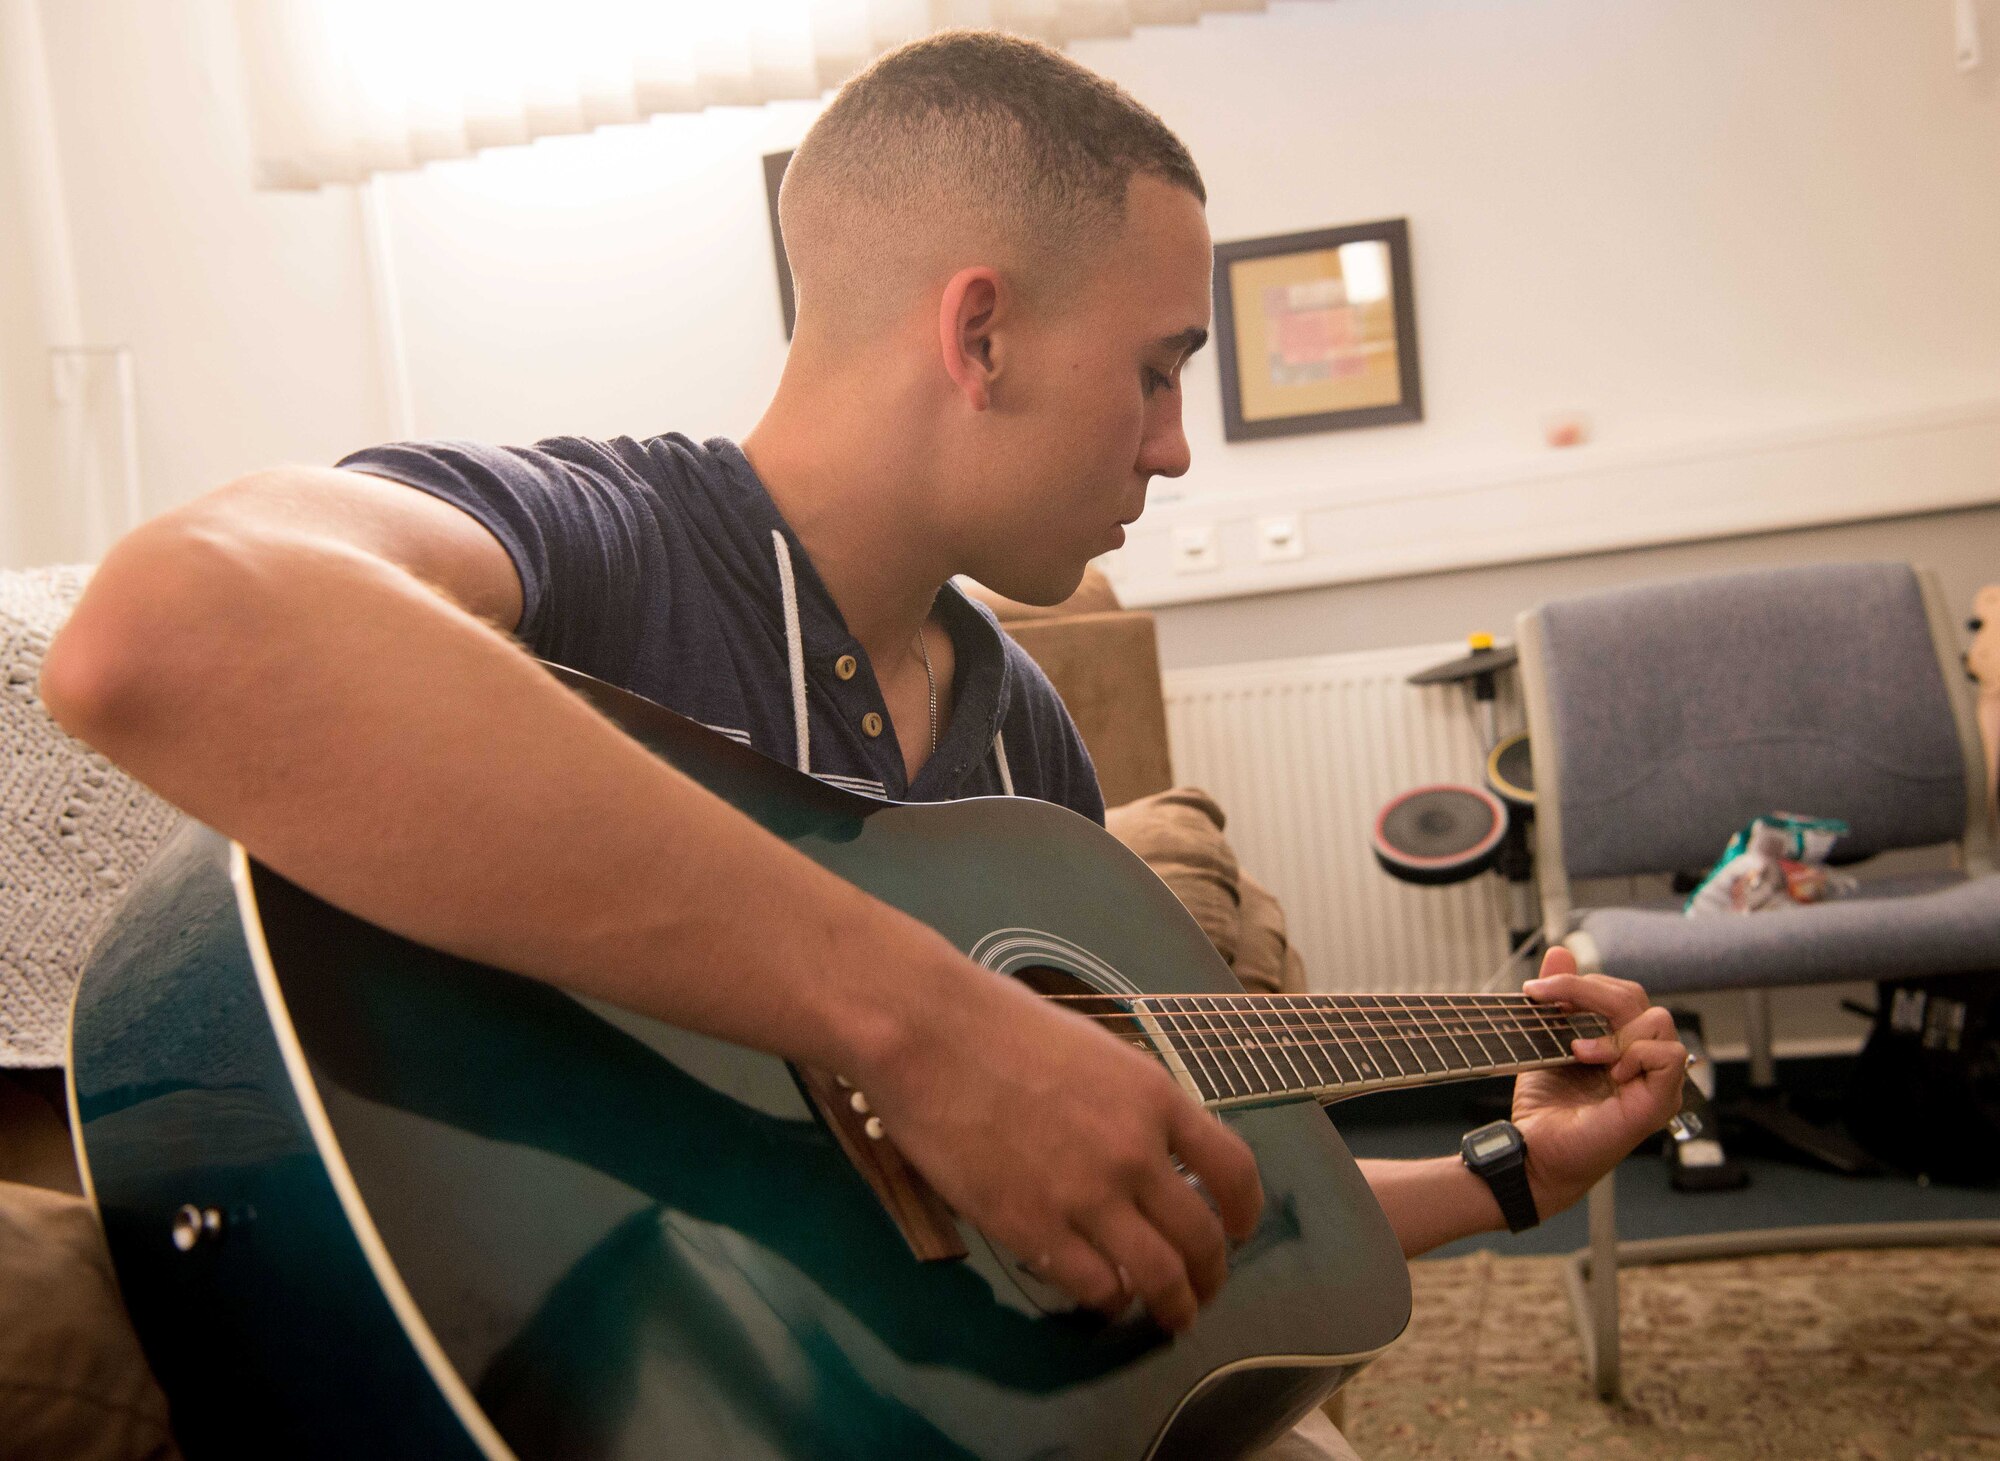 An Airman practices guitar in the music room at Club 7 on Ramstein Air Base, June 10, 2017. The Ramstein and Kapaun Air Station Club 7s have a number of facilities including music rooms, game rooms and movie rooms for junior enlisted Airmen to enjoy. (U.S. Air Force photo by Senior Airman Elizabeth Baker)